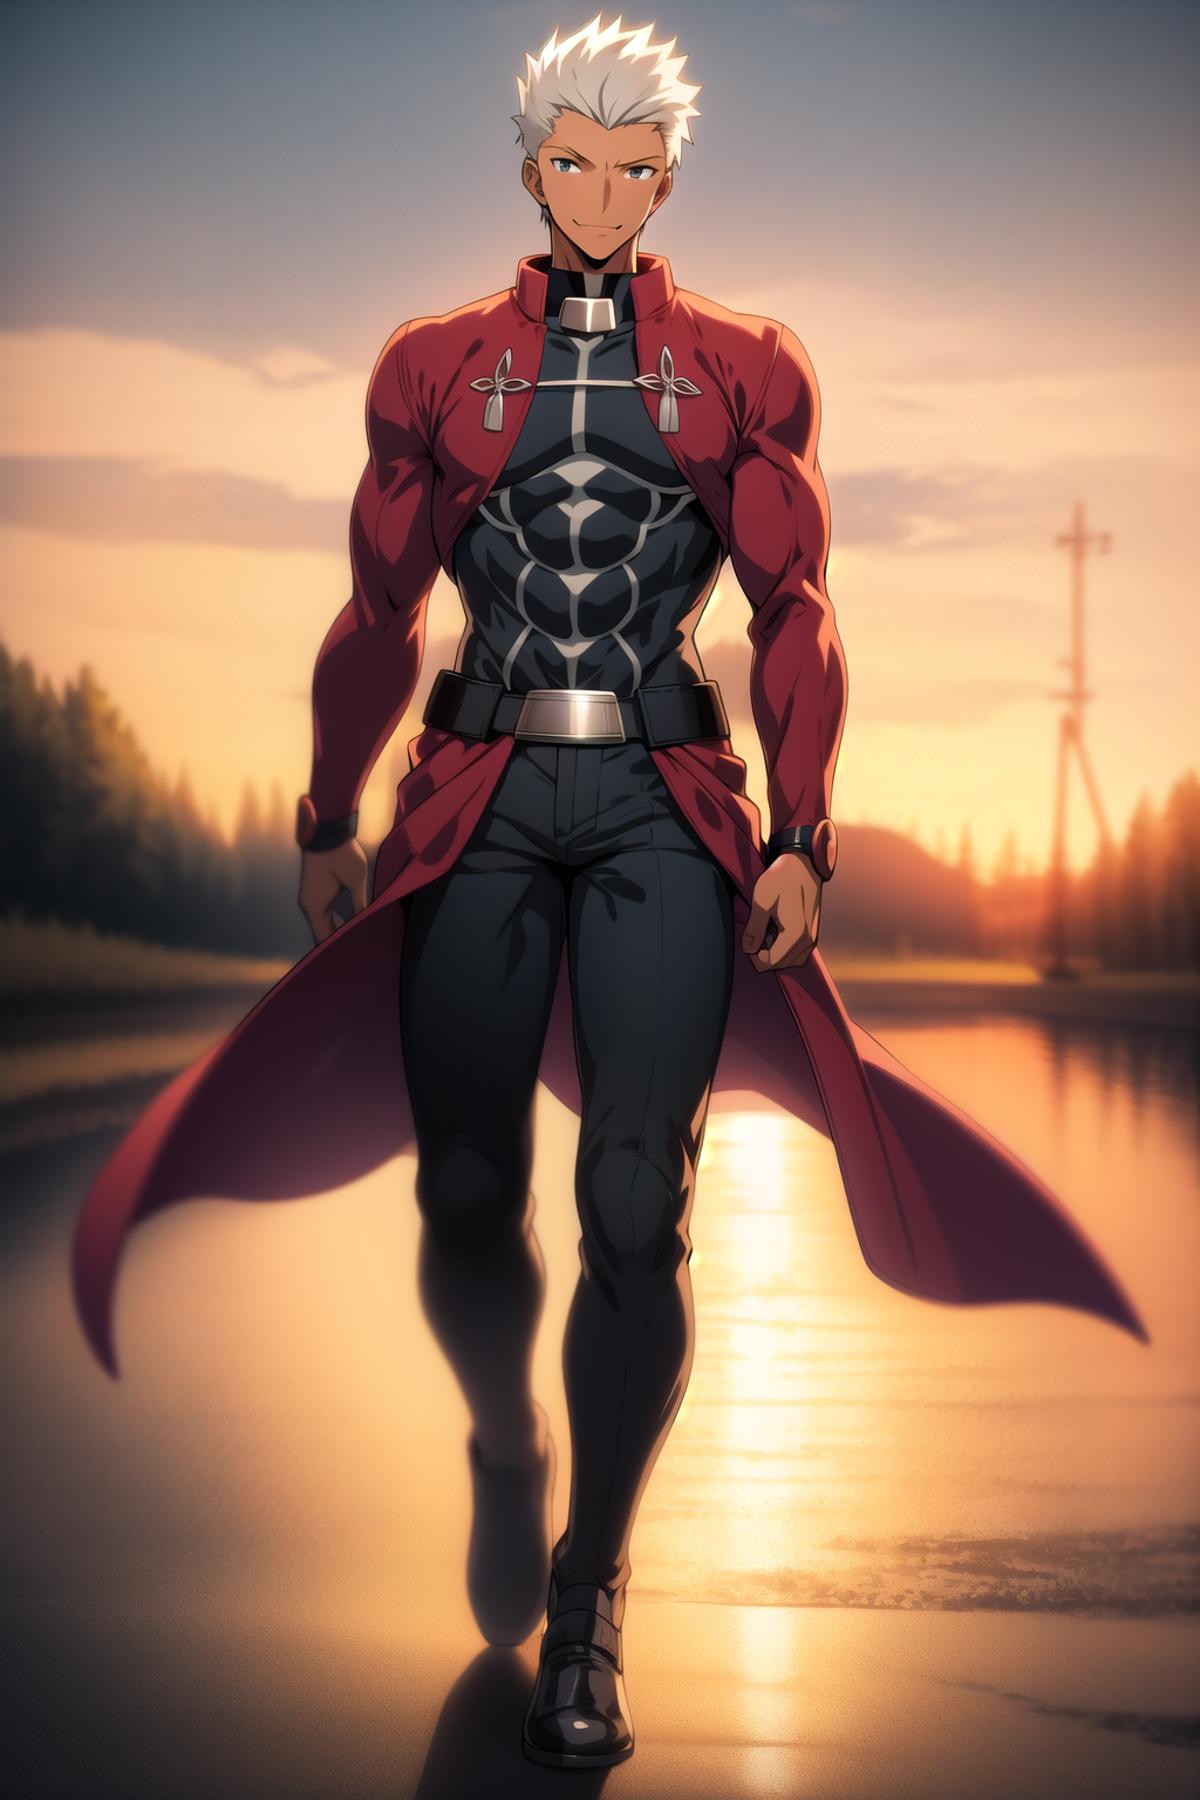 archer (fate/stay night) image by wrench1815